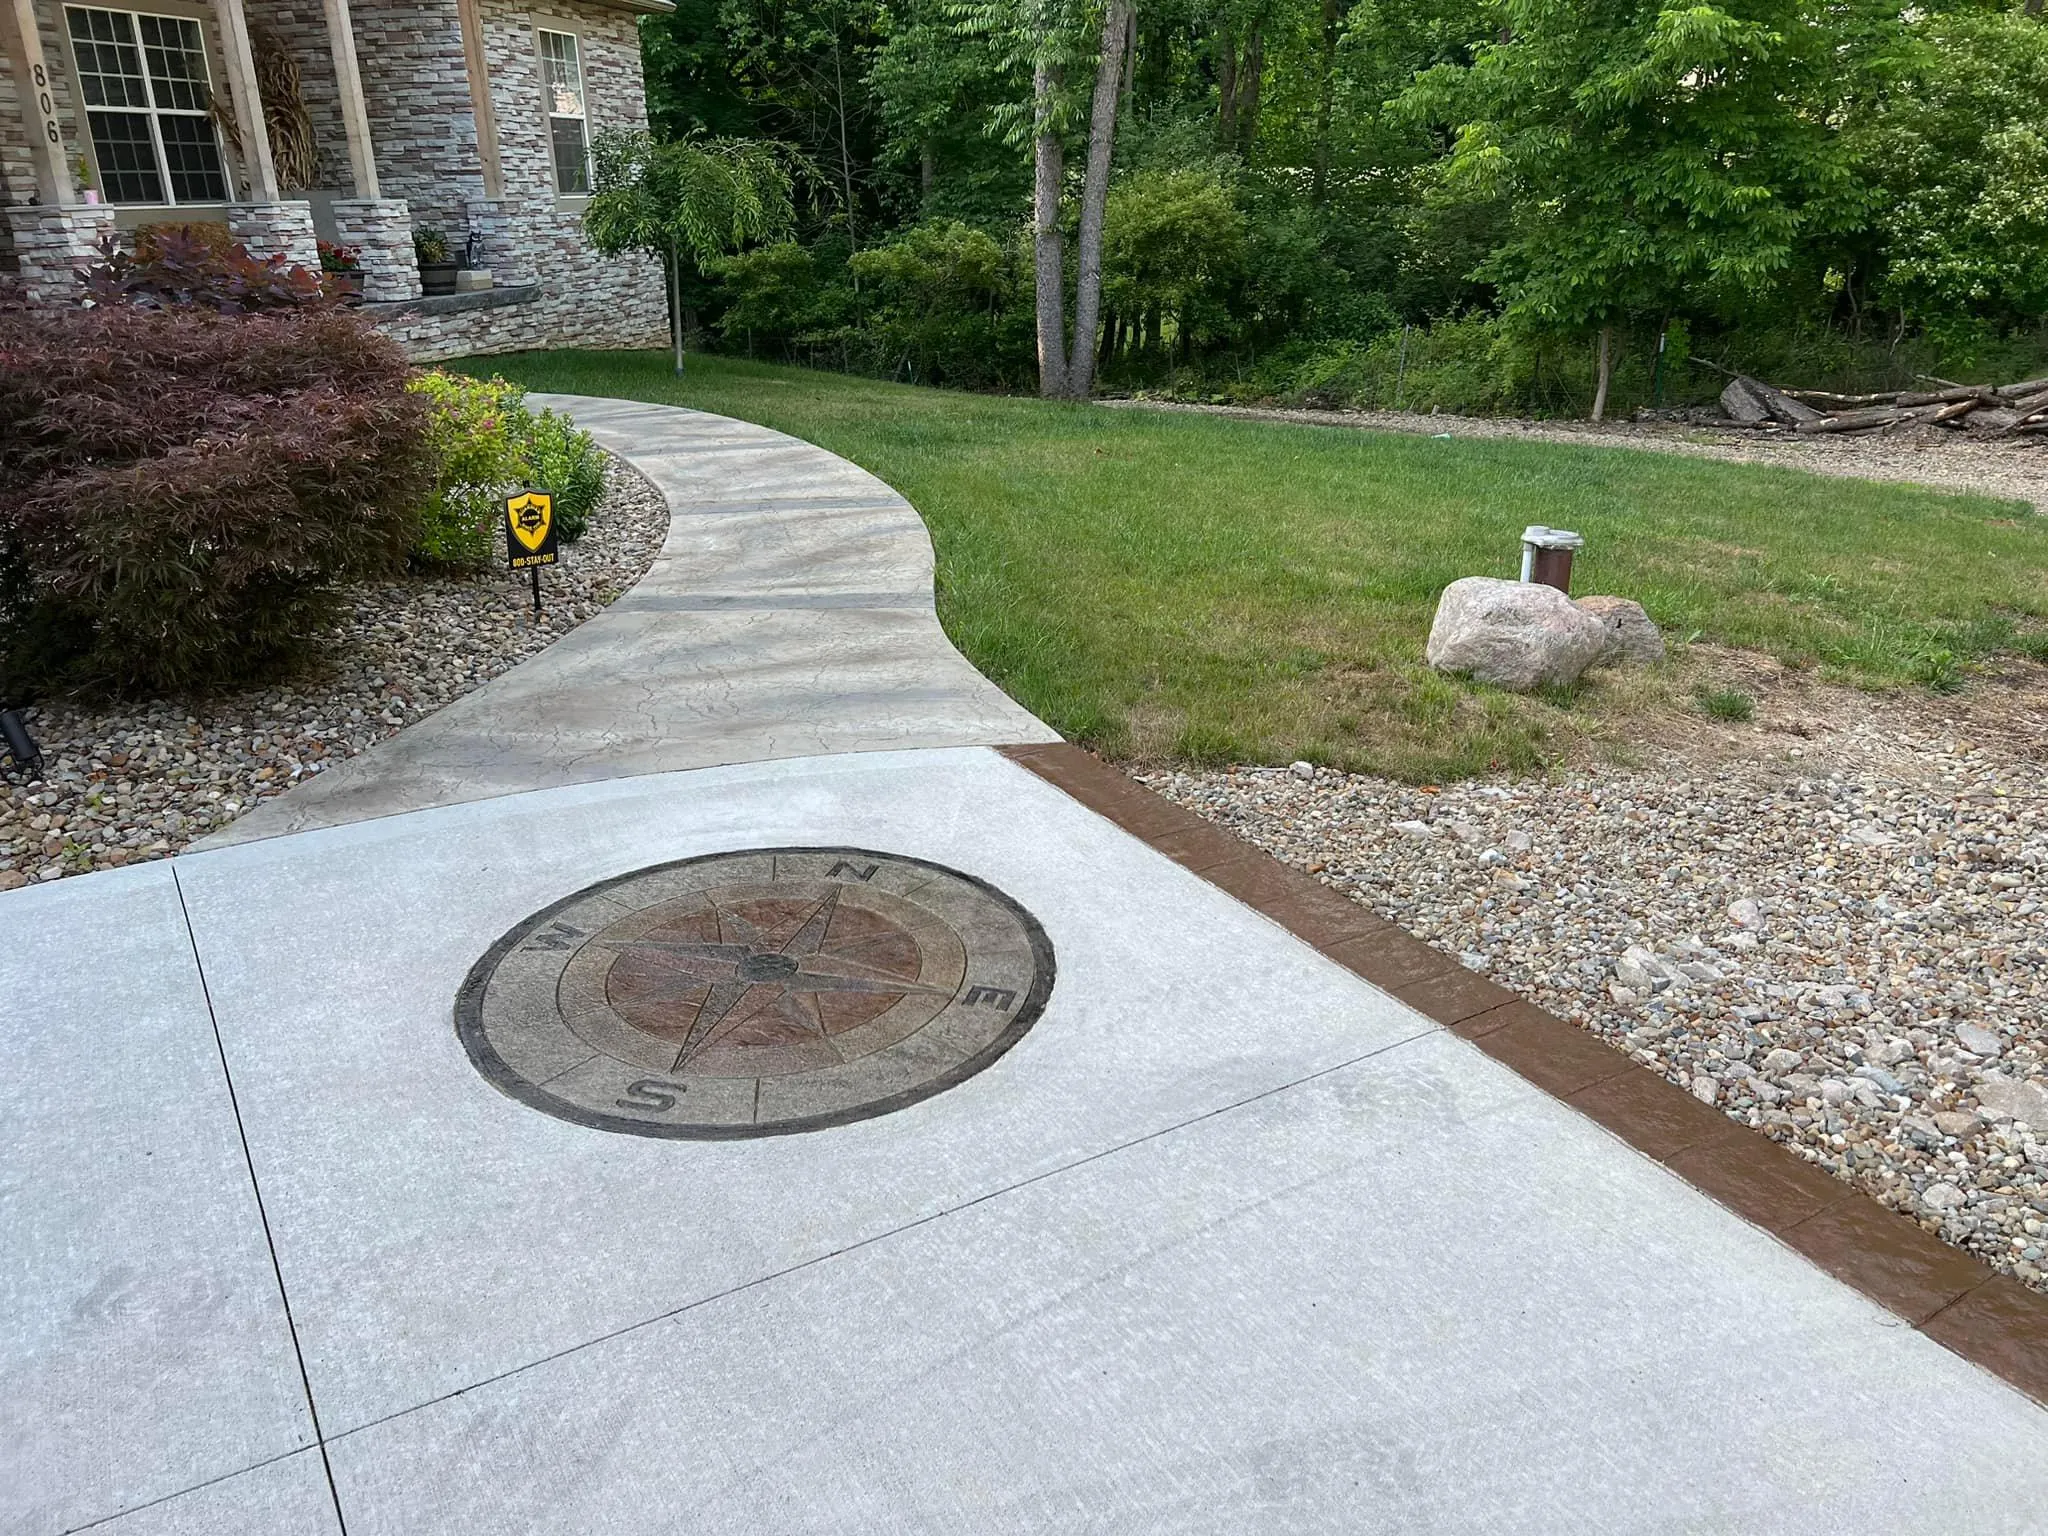 Stamped Concrete for CK Concrete in Lorain, OH